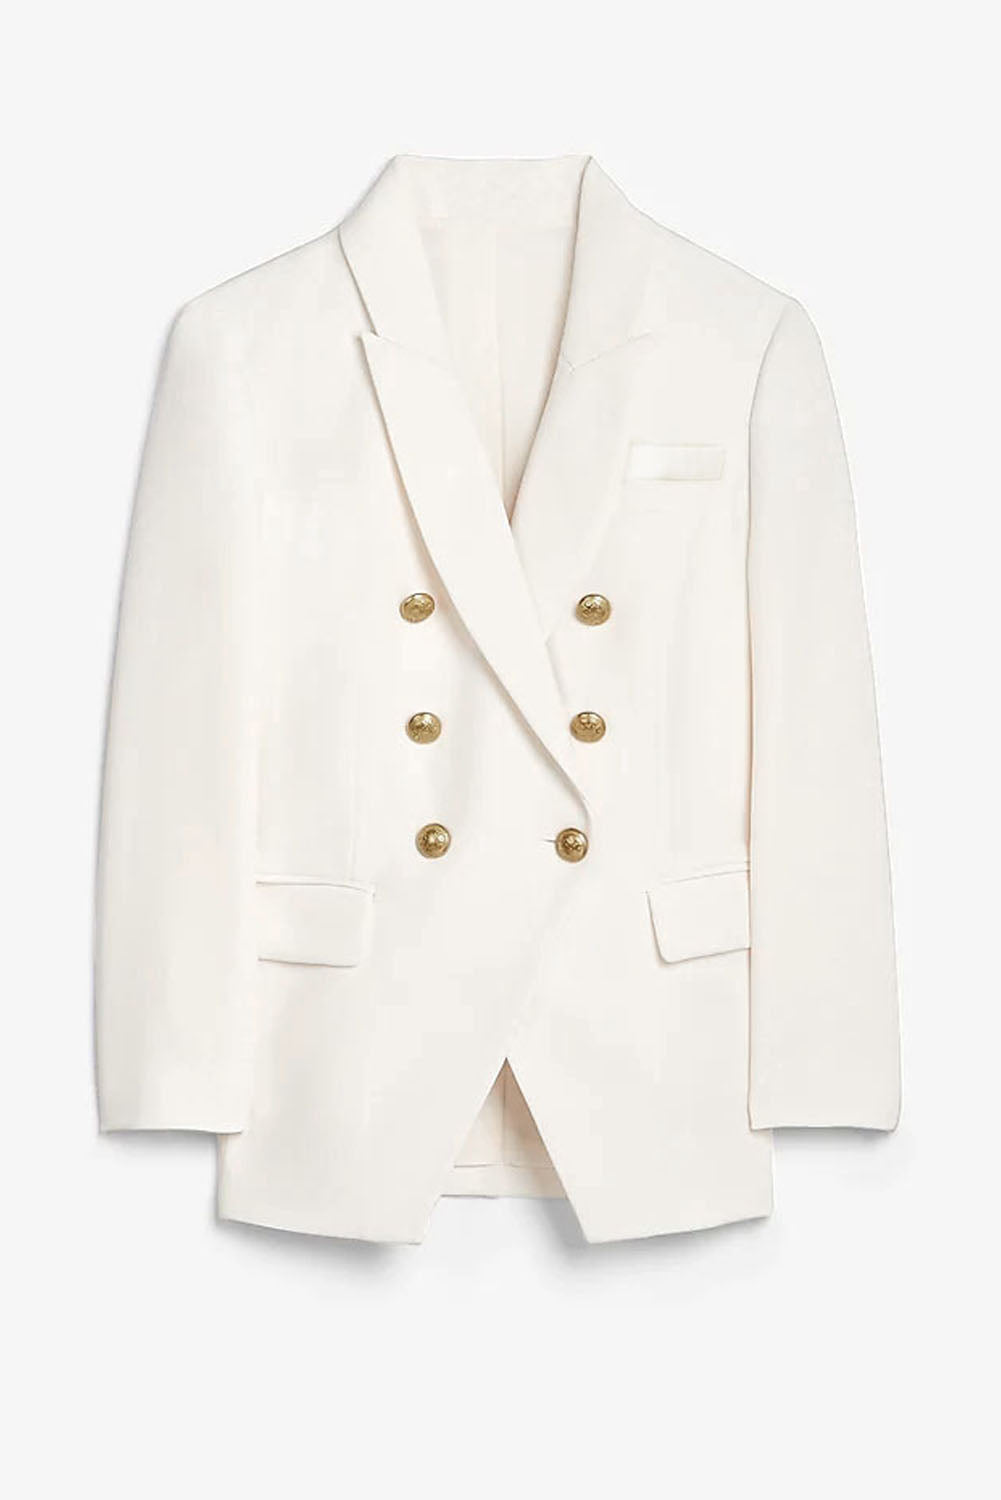 LC852446-1-S, LC852446-1-M, LC852446-1-L, LC852446-1-XL, LC852446-1-2XL, White Womens Lapel Button Work Jackets Draped Open Front Work Suit